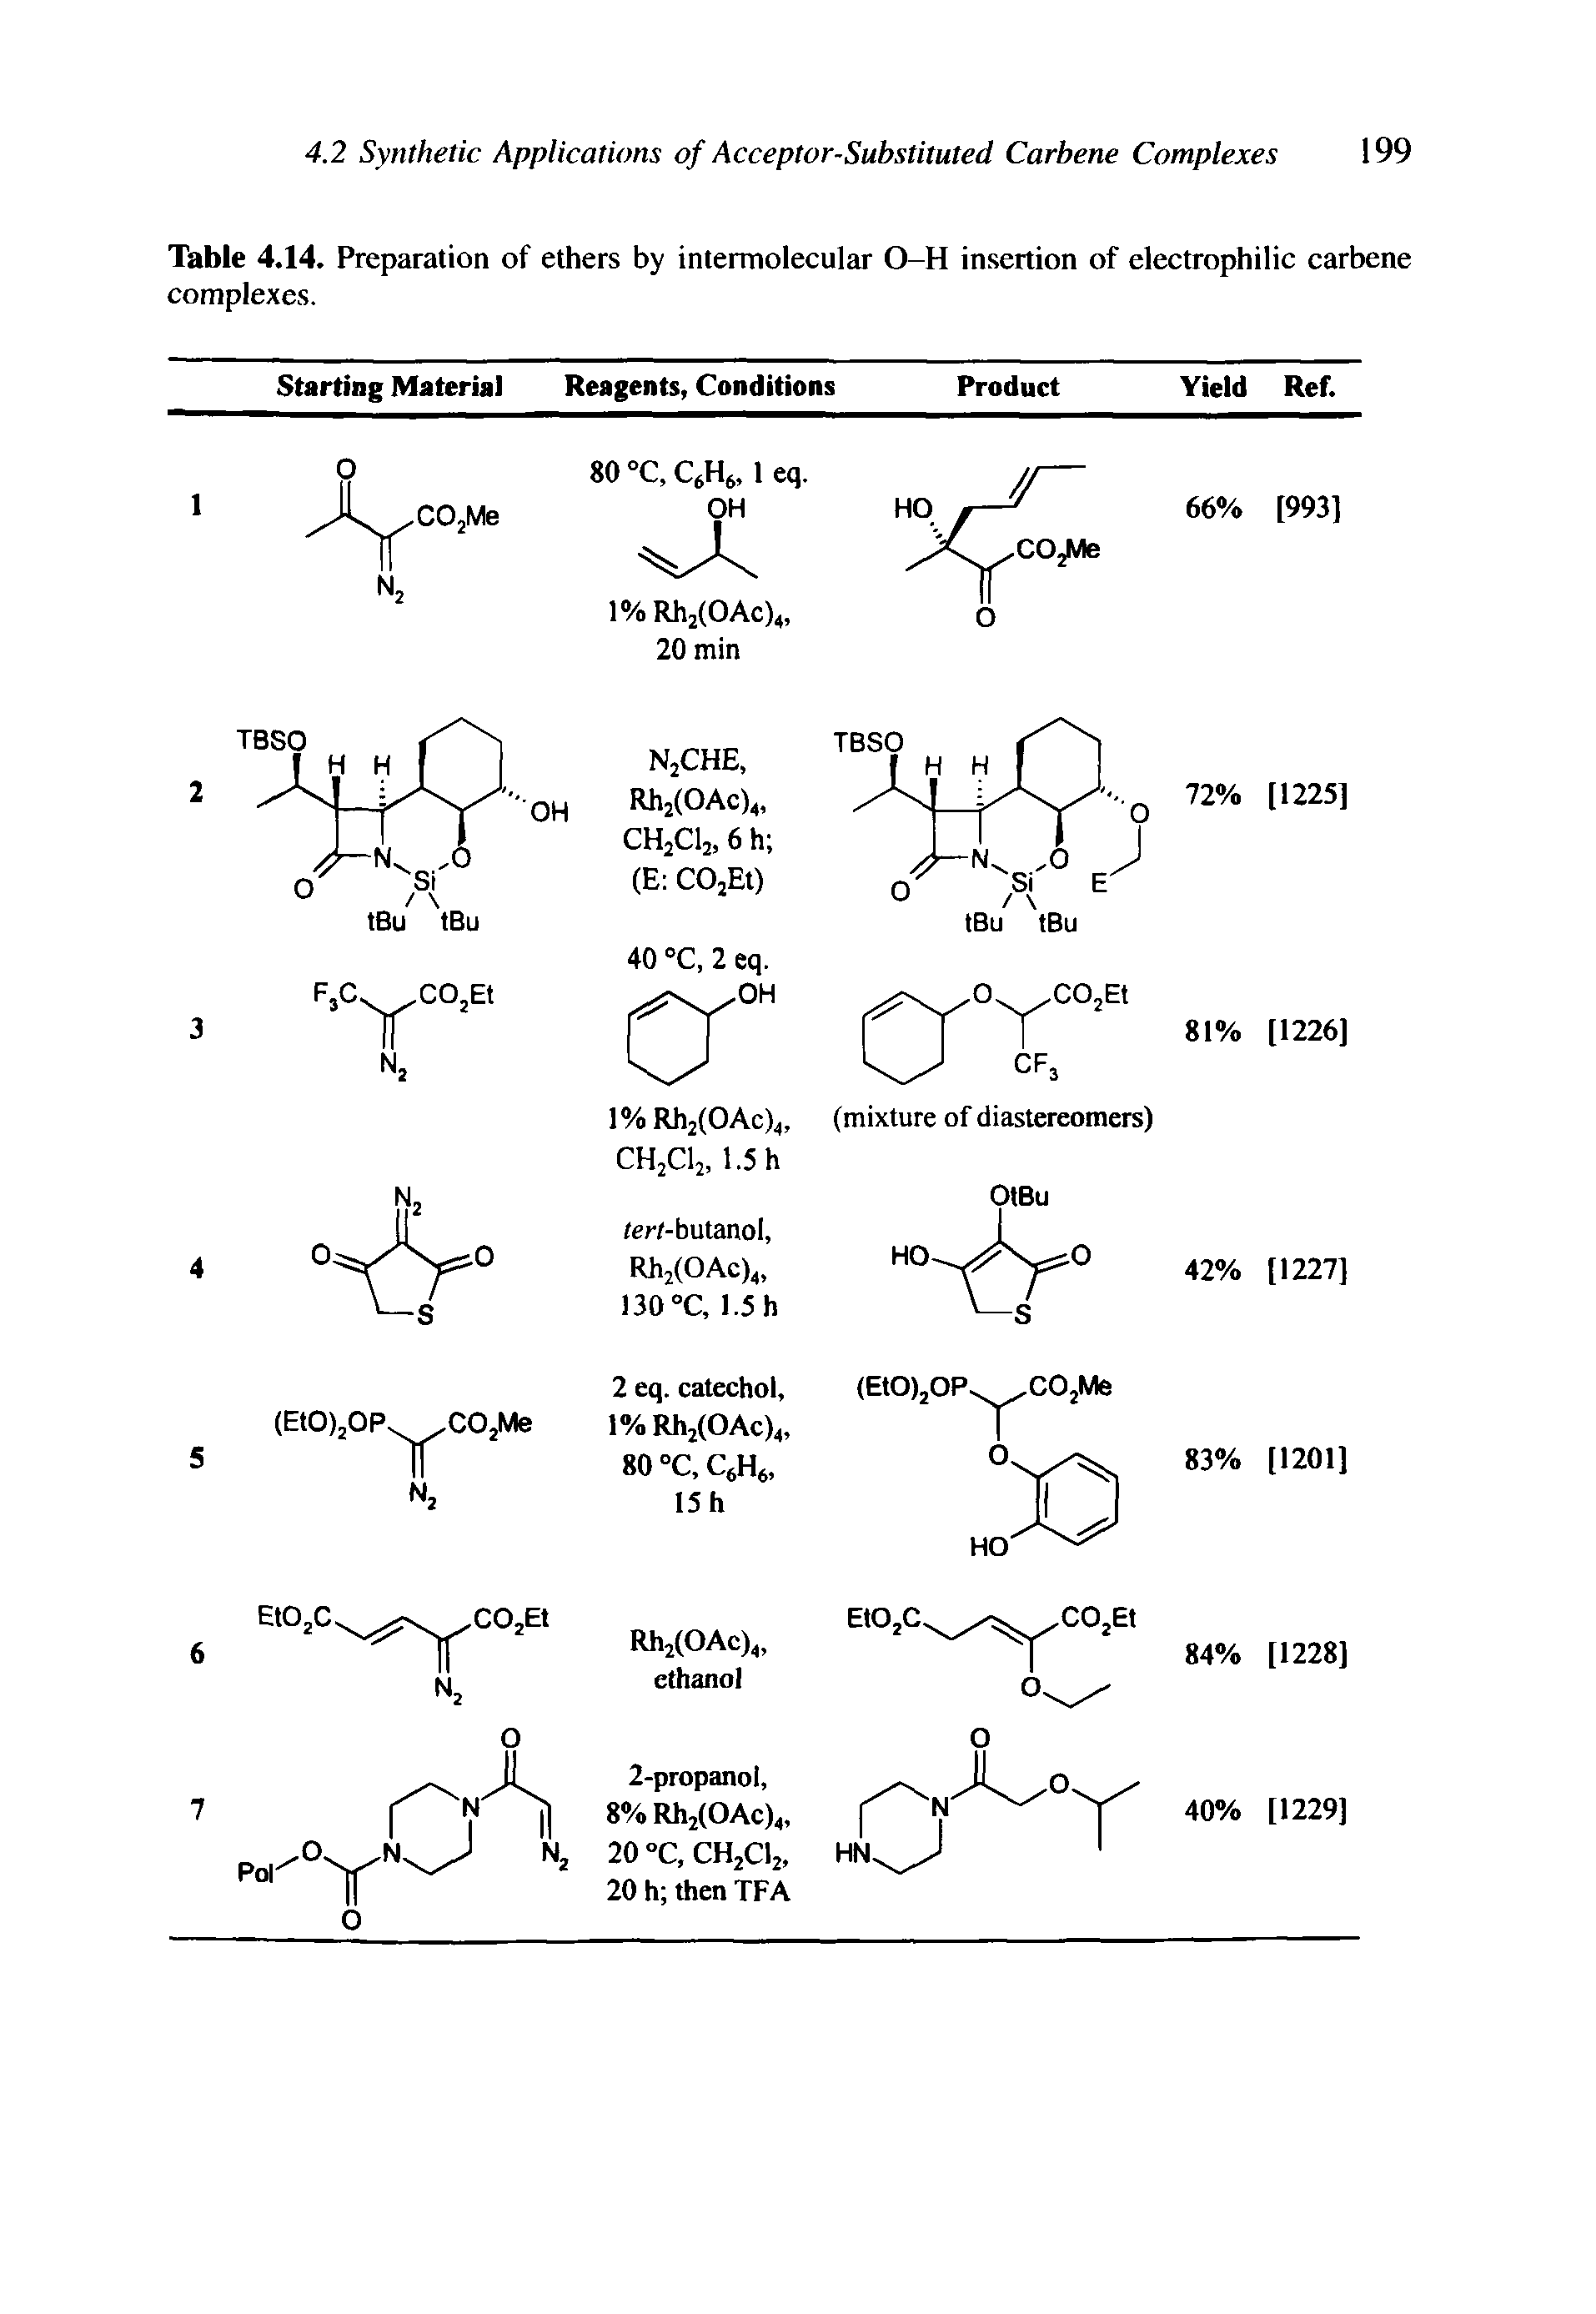 Table 4.14. Preparation of ethers by intermolecular O-H insertion of electrophilic carbene complexes.